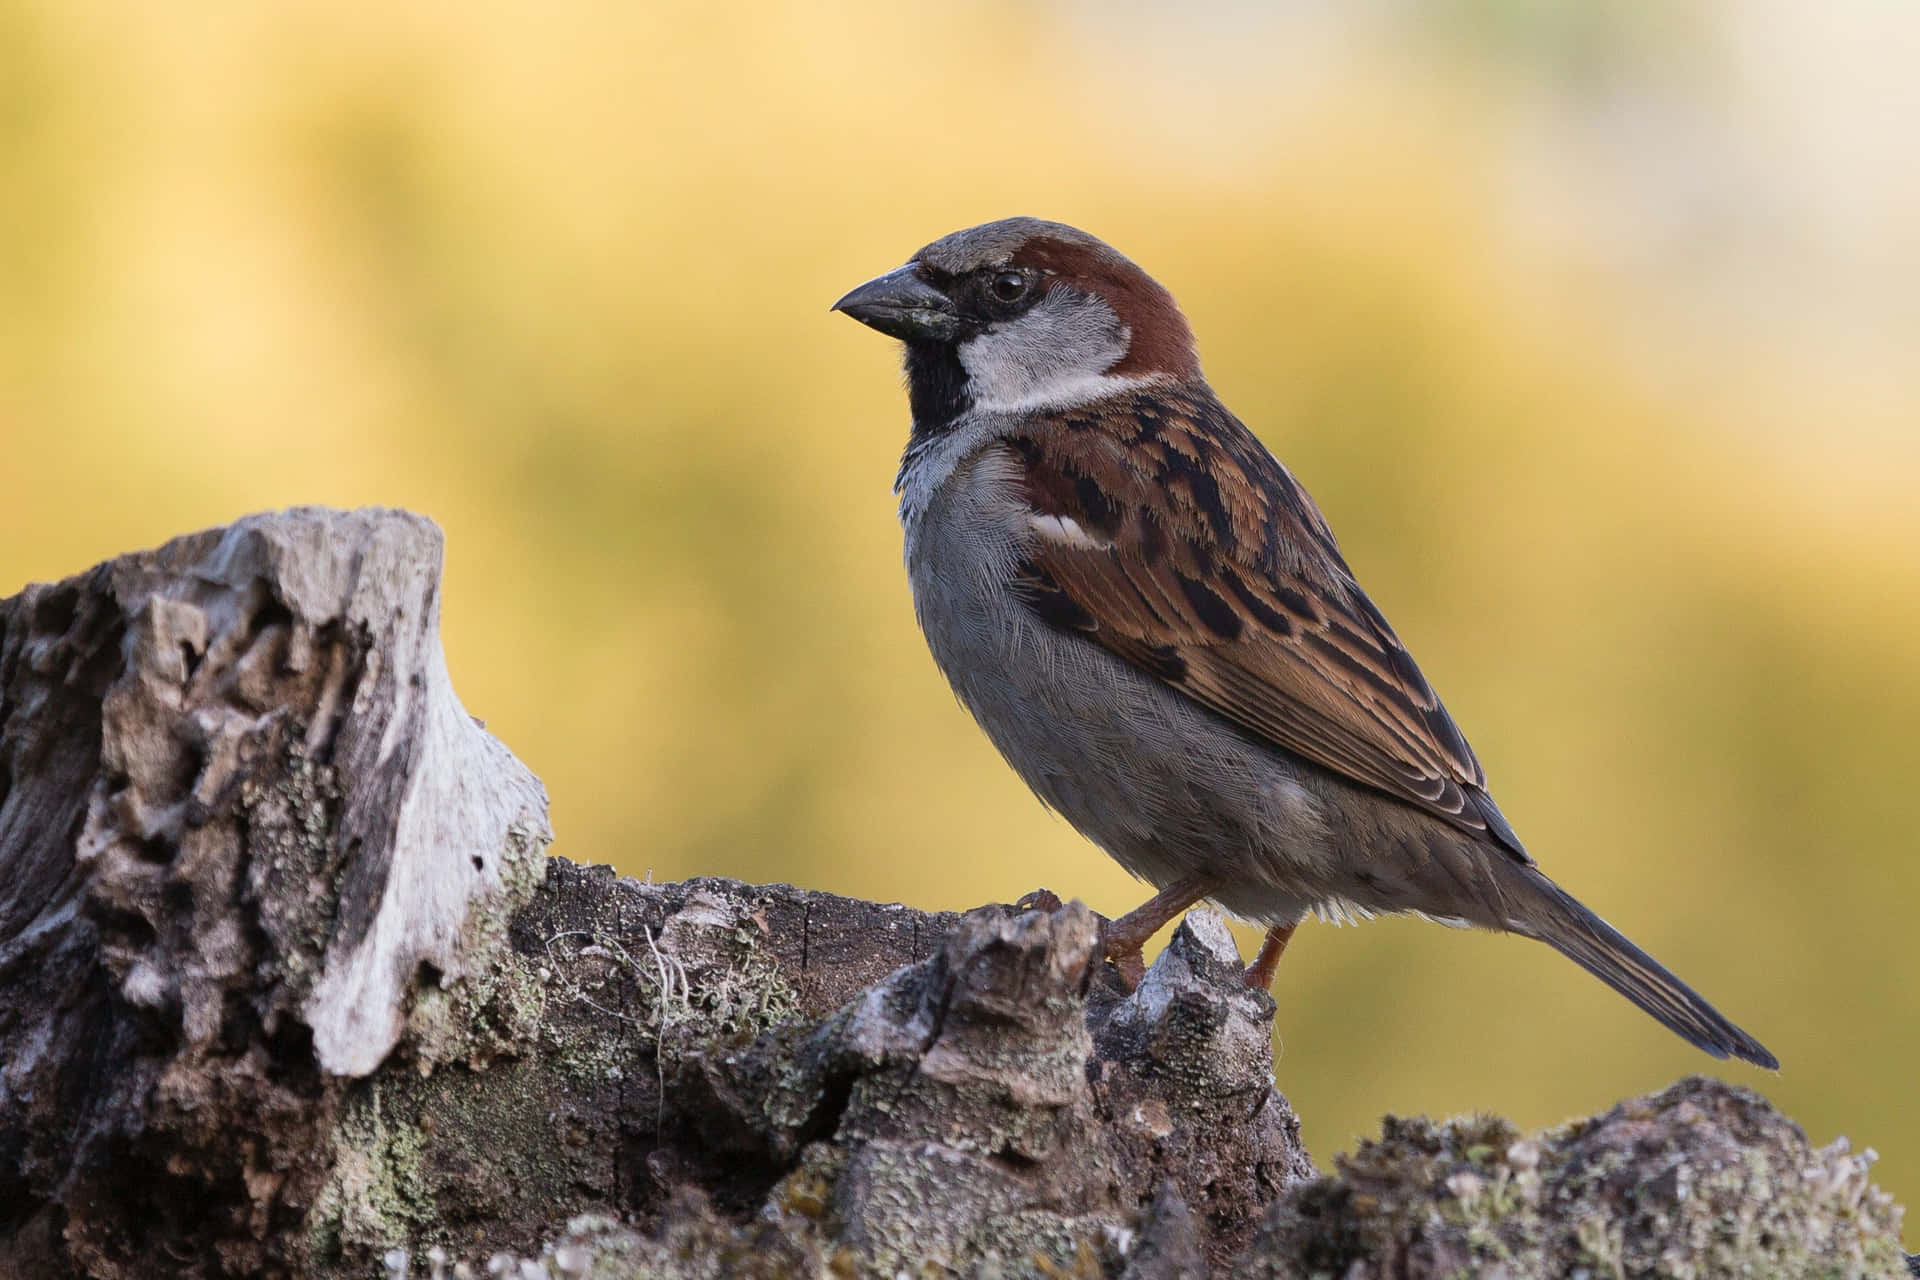 A Sparrow bird perched on a branch